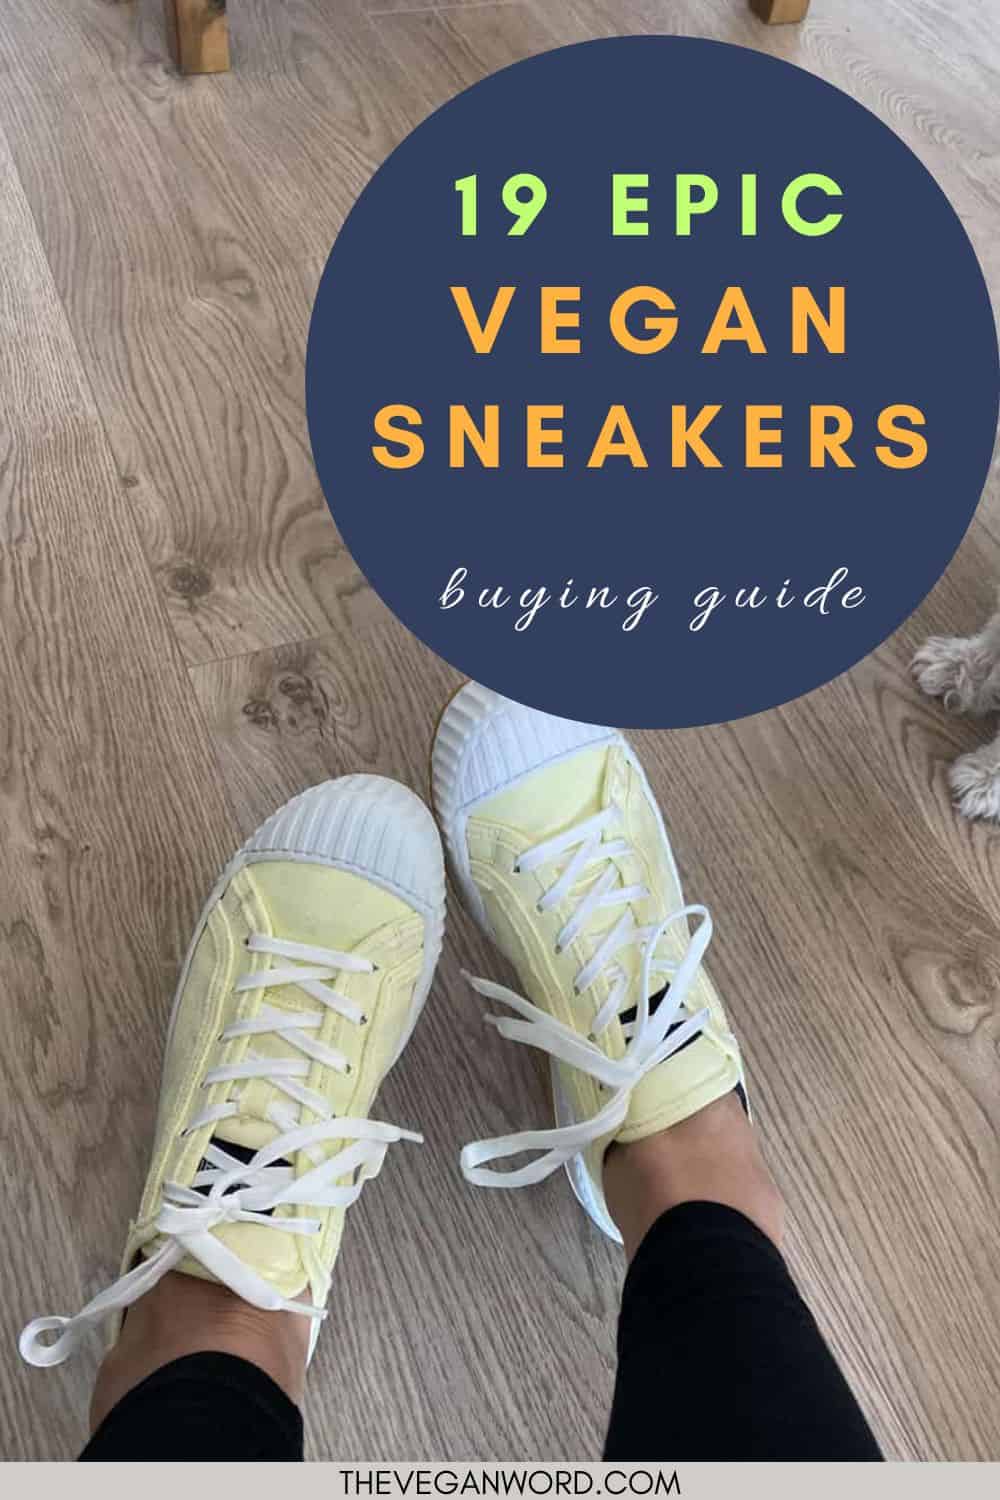 Pinterest image of author's feet in komrads vegan sneakers with text that reads "19 epic vegan sneakers: buying guide"